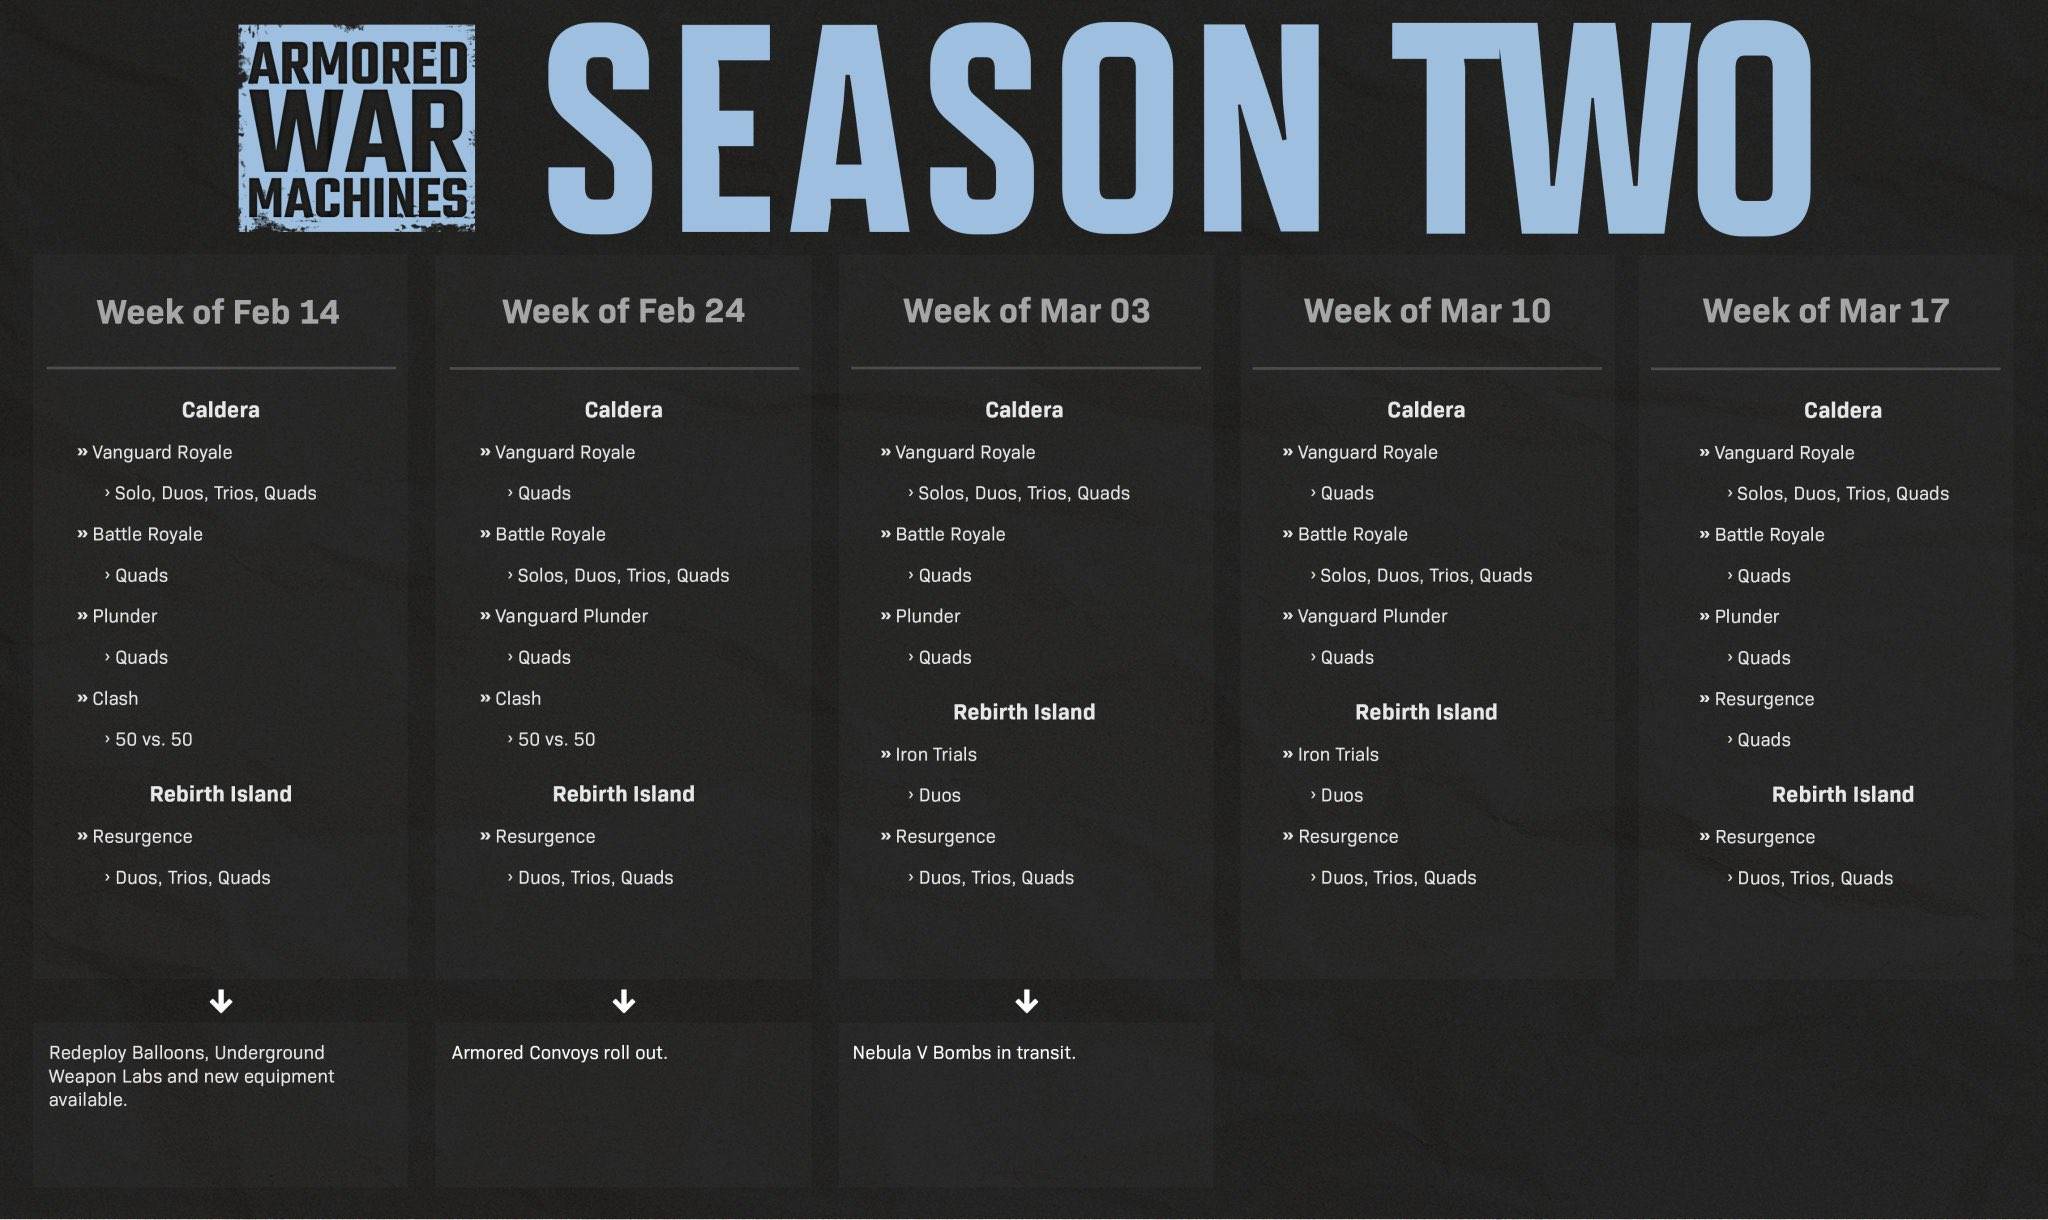 Armored War Machines Season Two by weeks